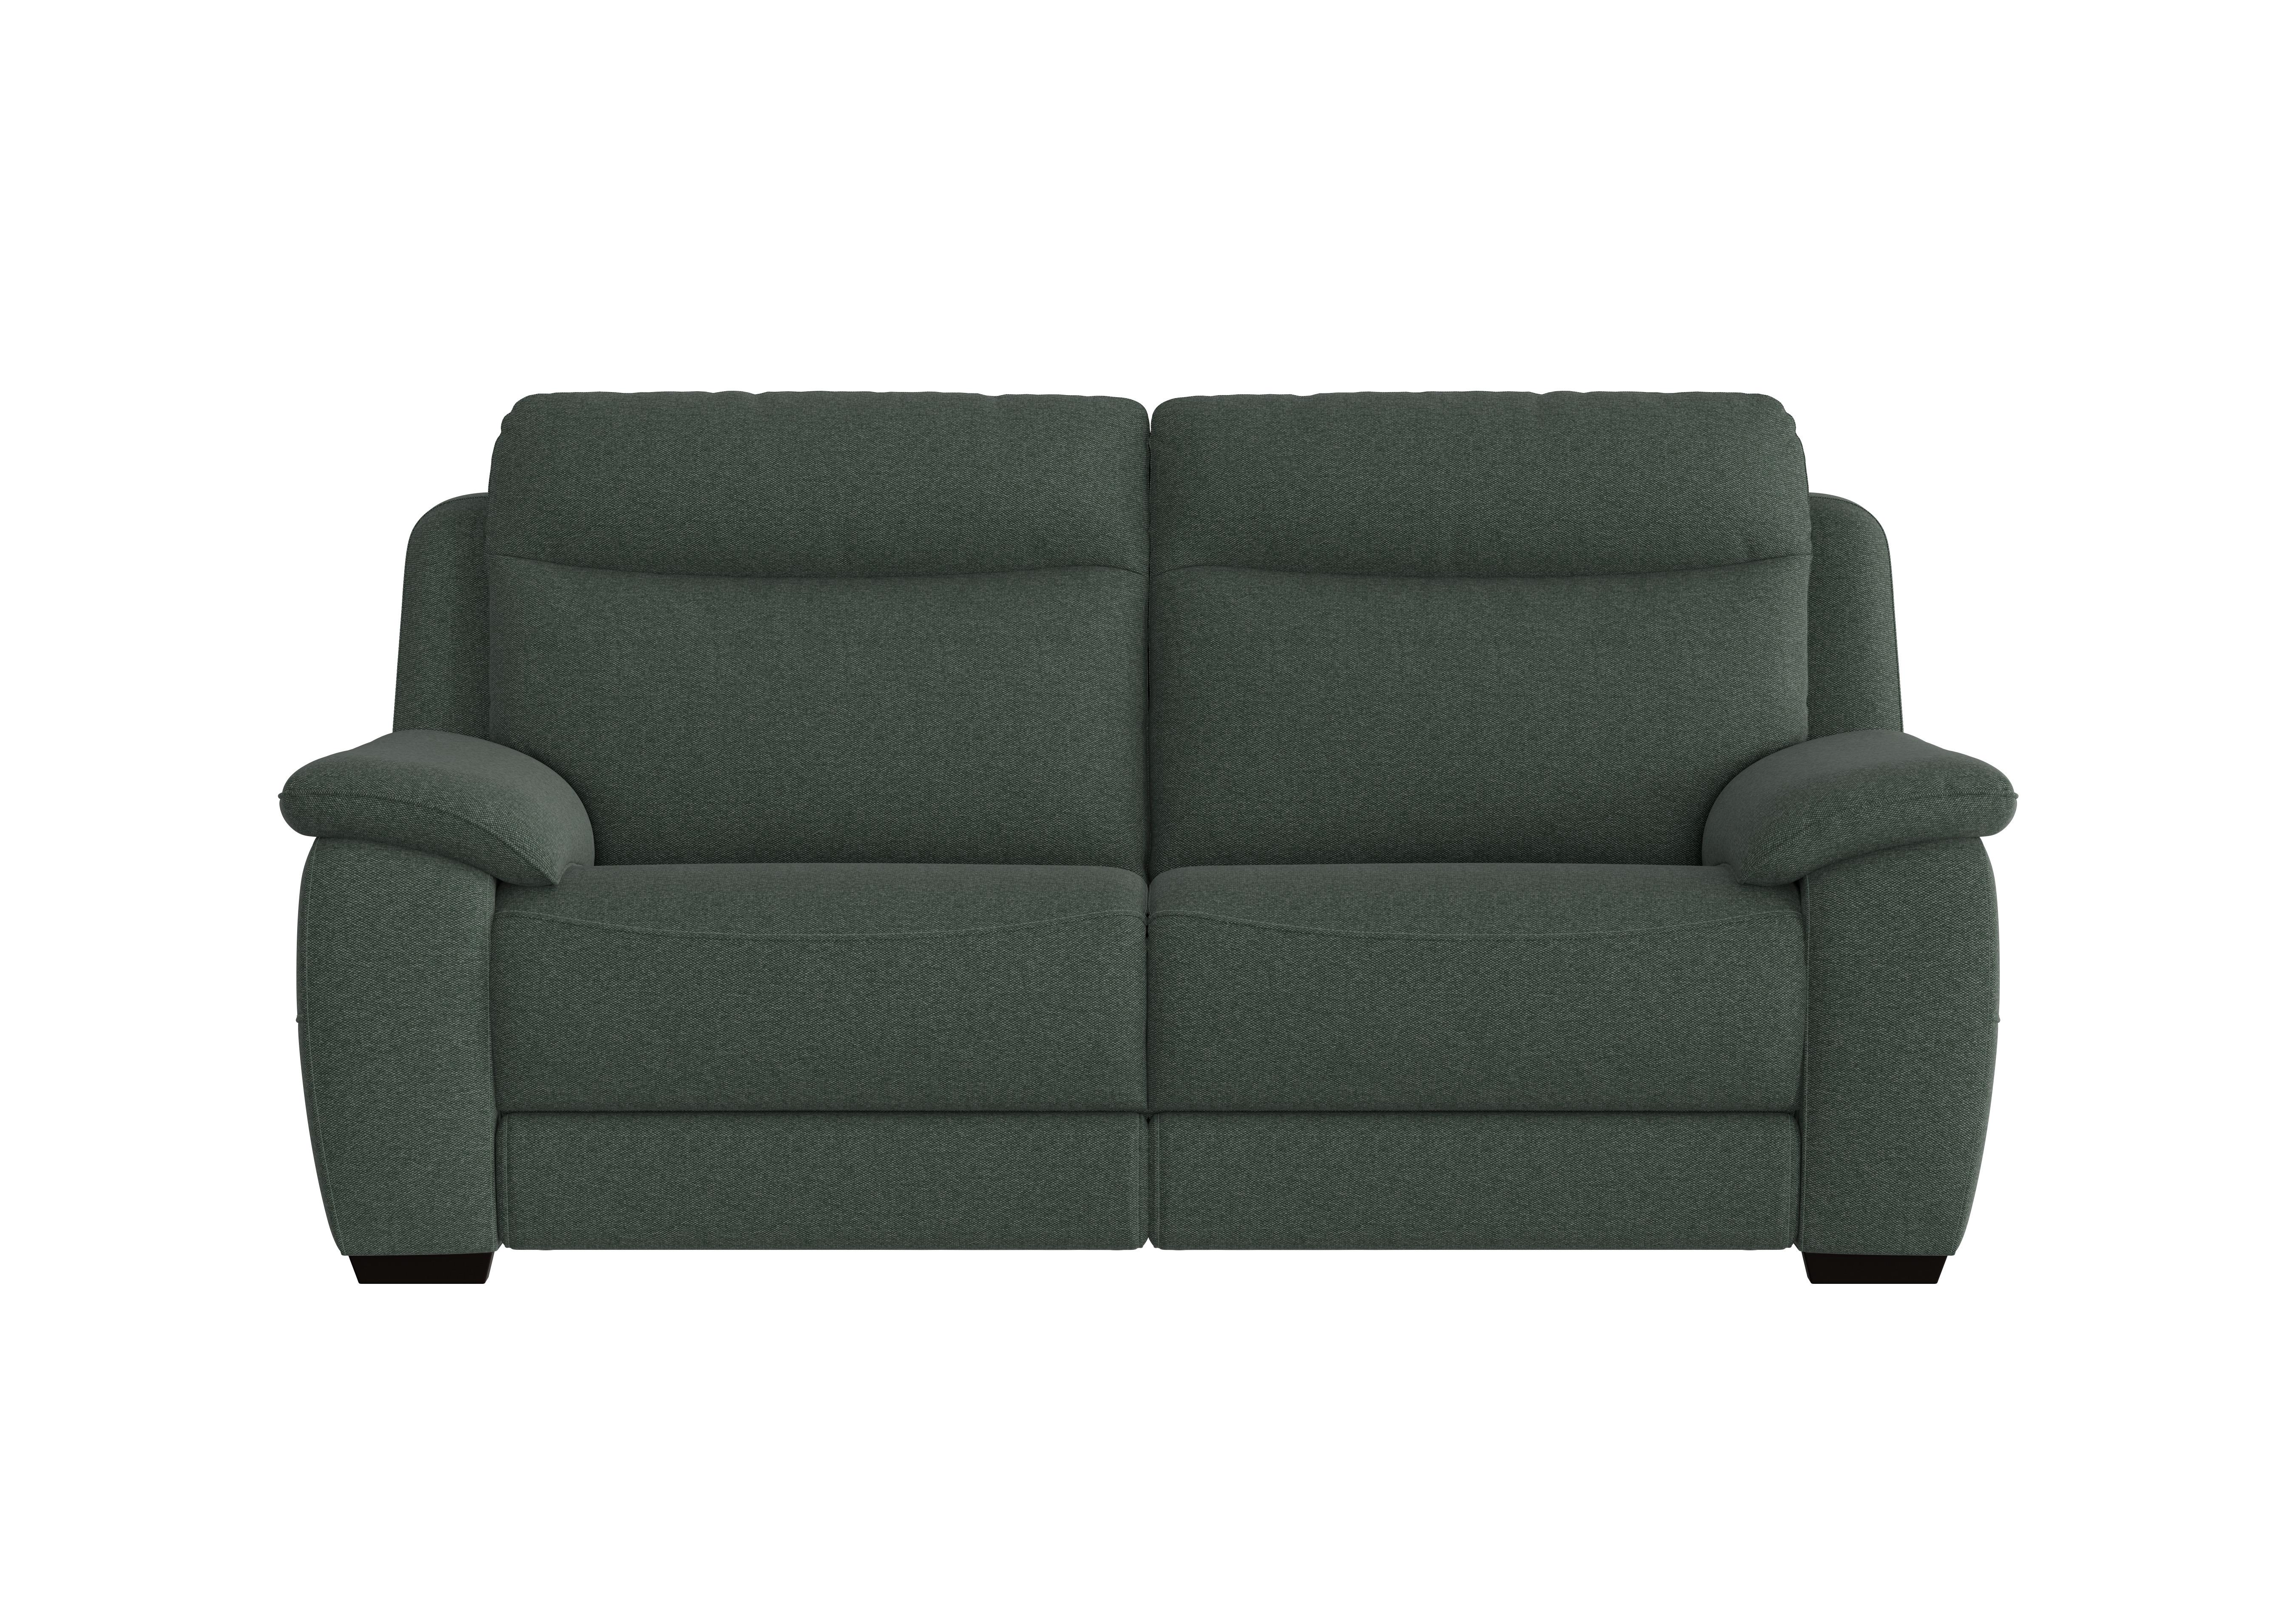 Starlight Express 3 Seater Fabric Recliner Sofa with Power Headrests in Fab-Ska-R48 Moss Green on Furniture Village